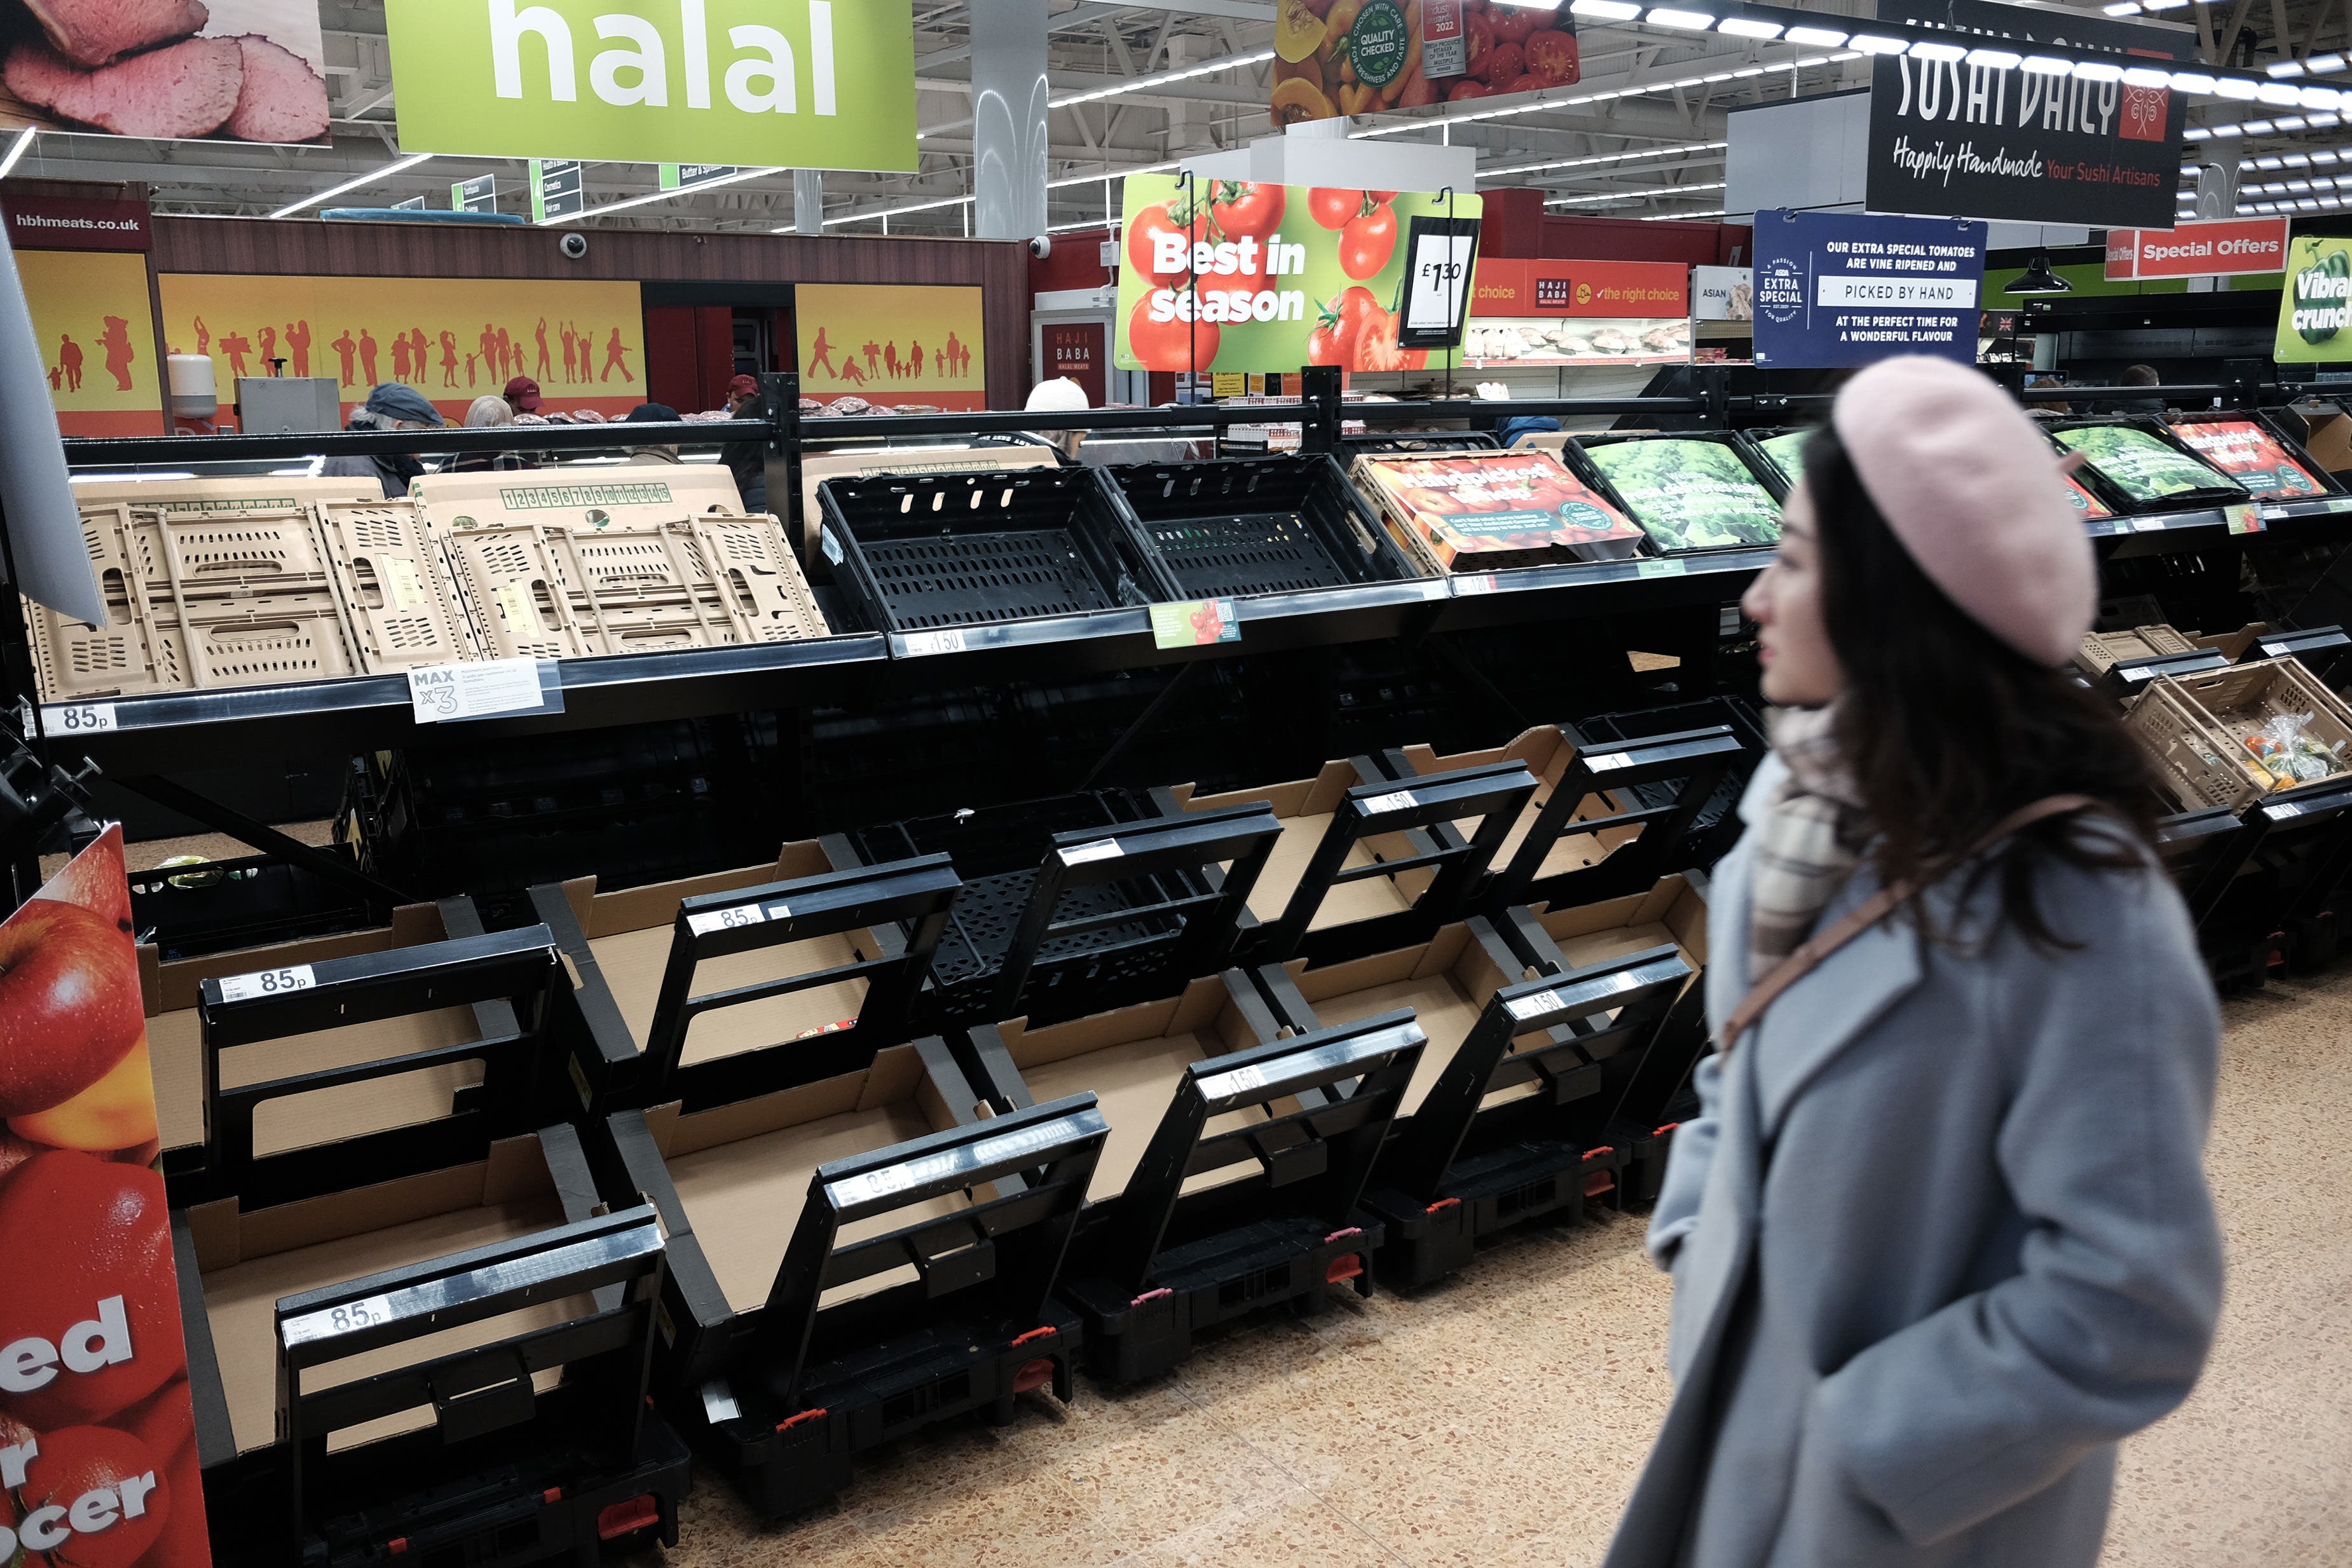 Empty shelves are the last thing supermarkets want to see